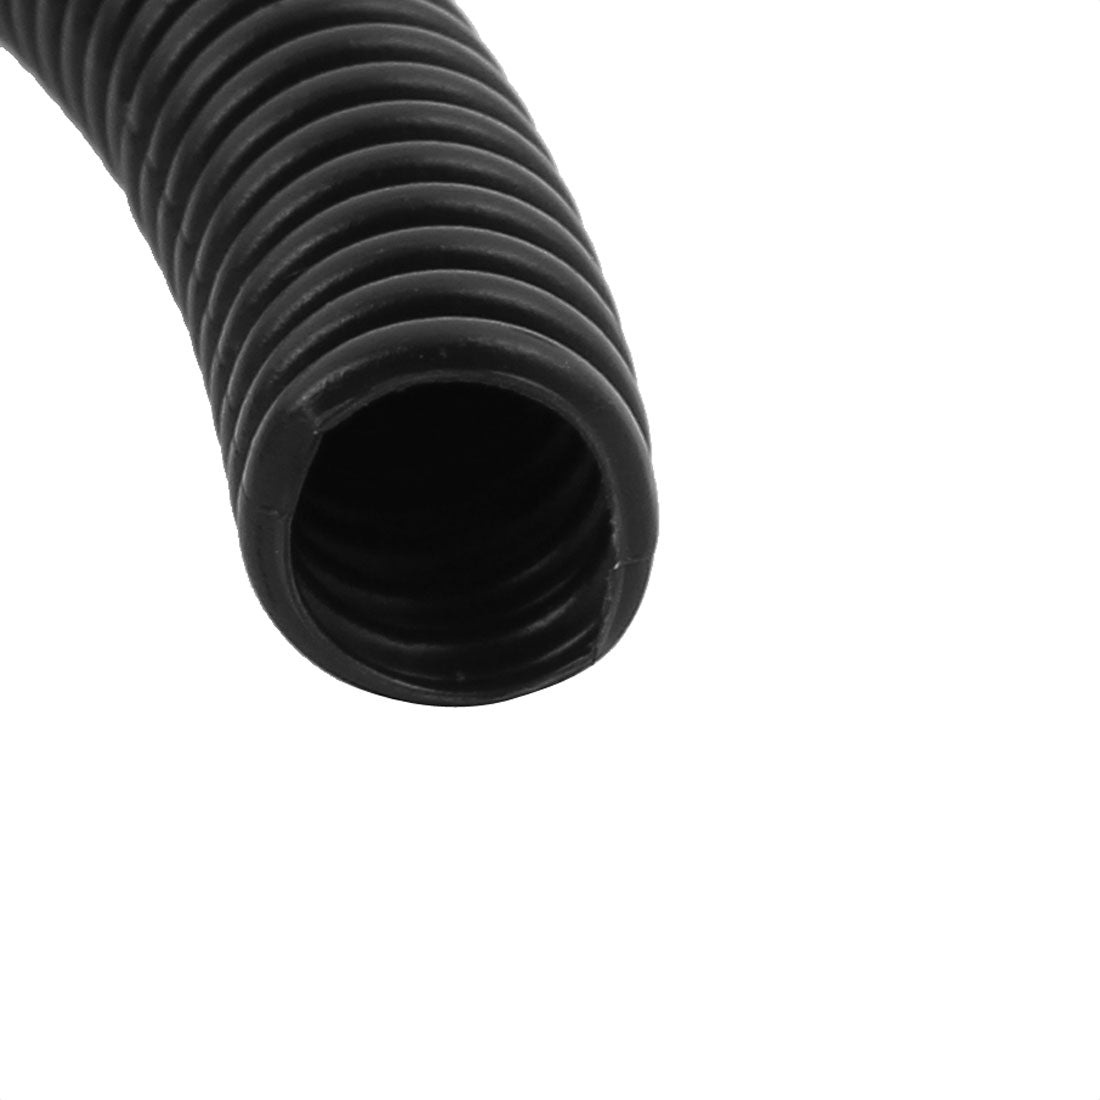 uxcell Uxcell 3.5 M 11 x 13 mm PVC Split Corrugated Conduit Tube for Garden,Office Black